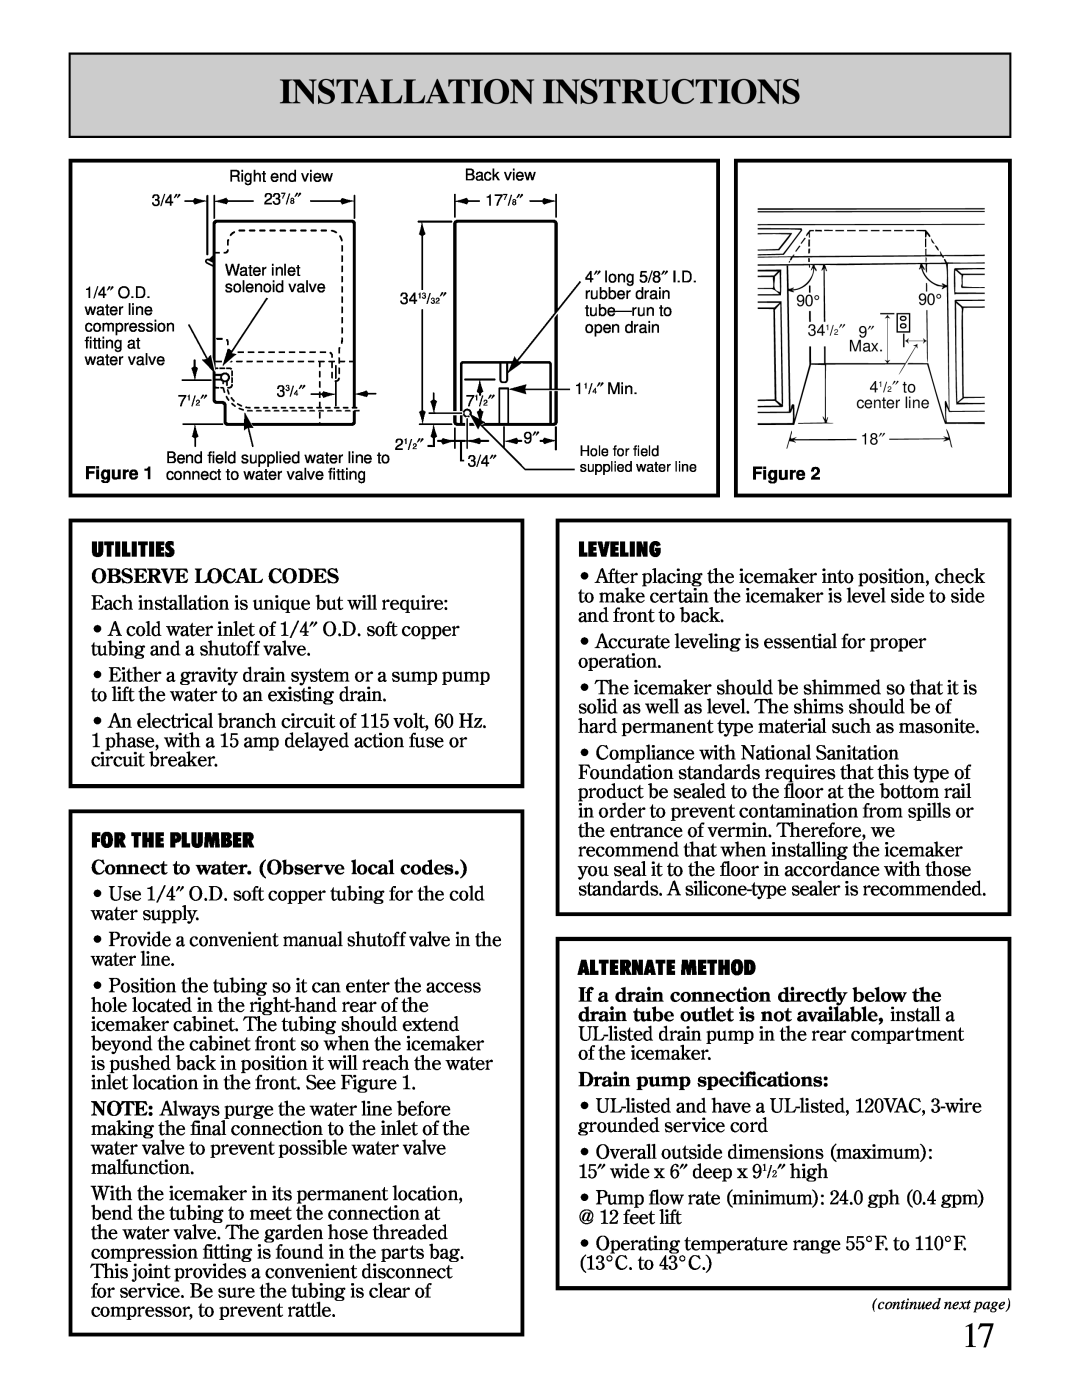 GE Monogram ZDIW50 Installation Instructions, Utilities, For The Plumber, Leveling, Alternate Method, Observe Local Codes 